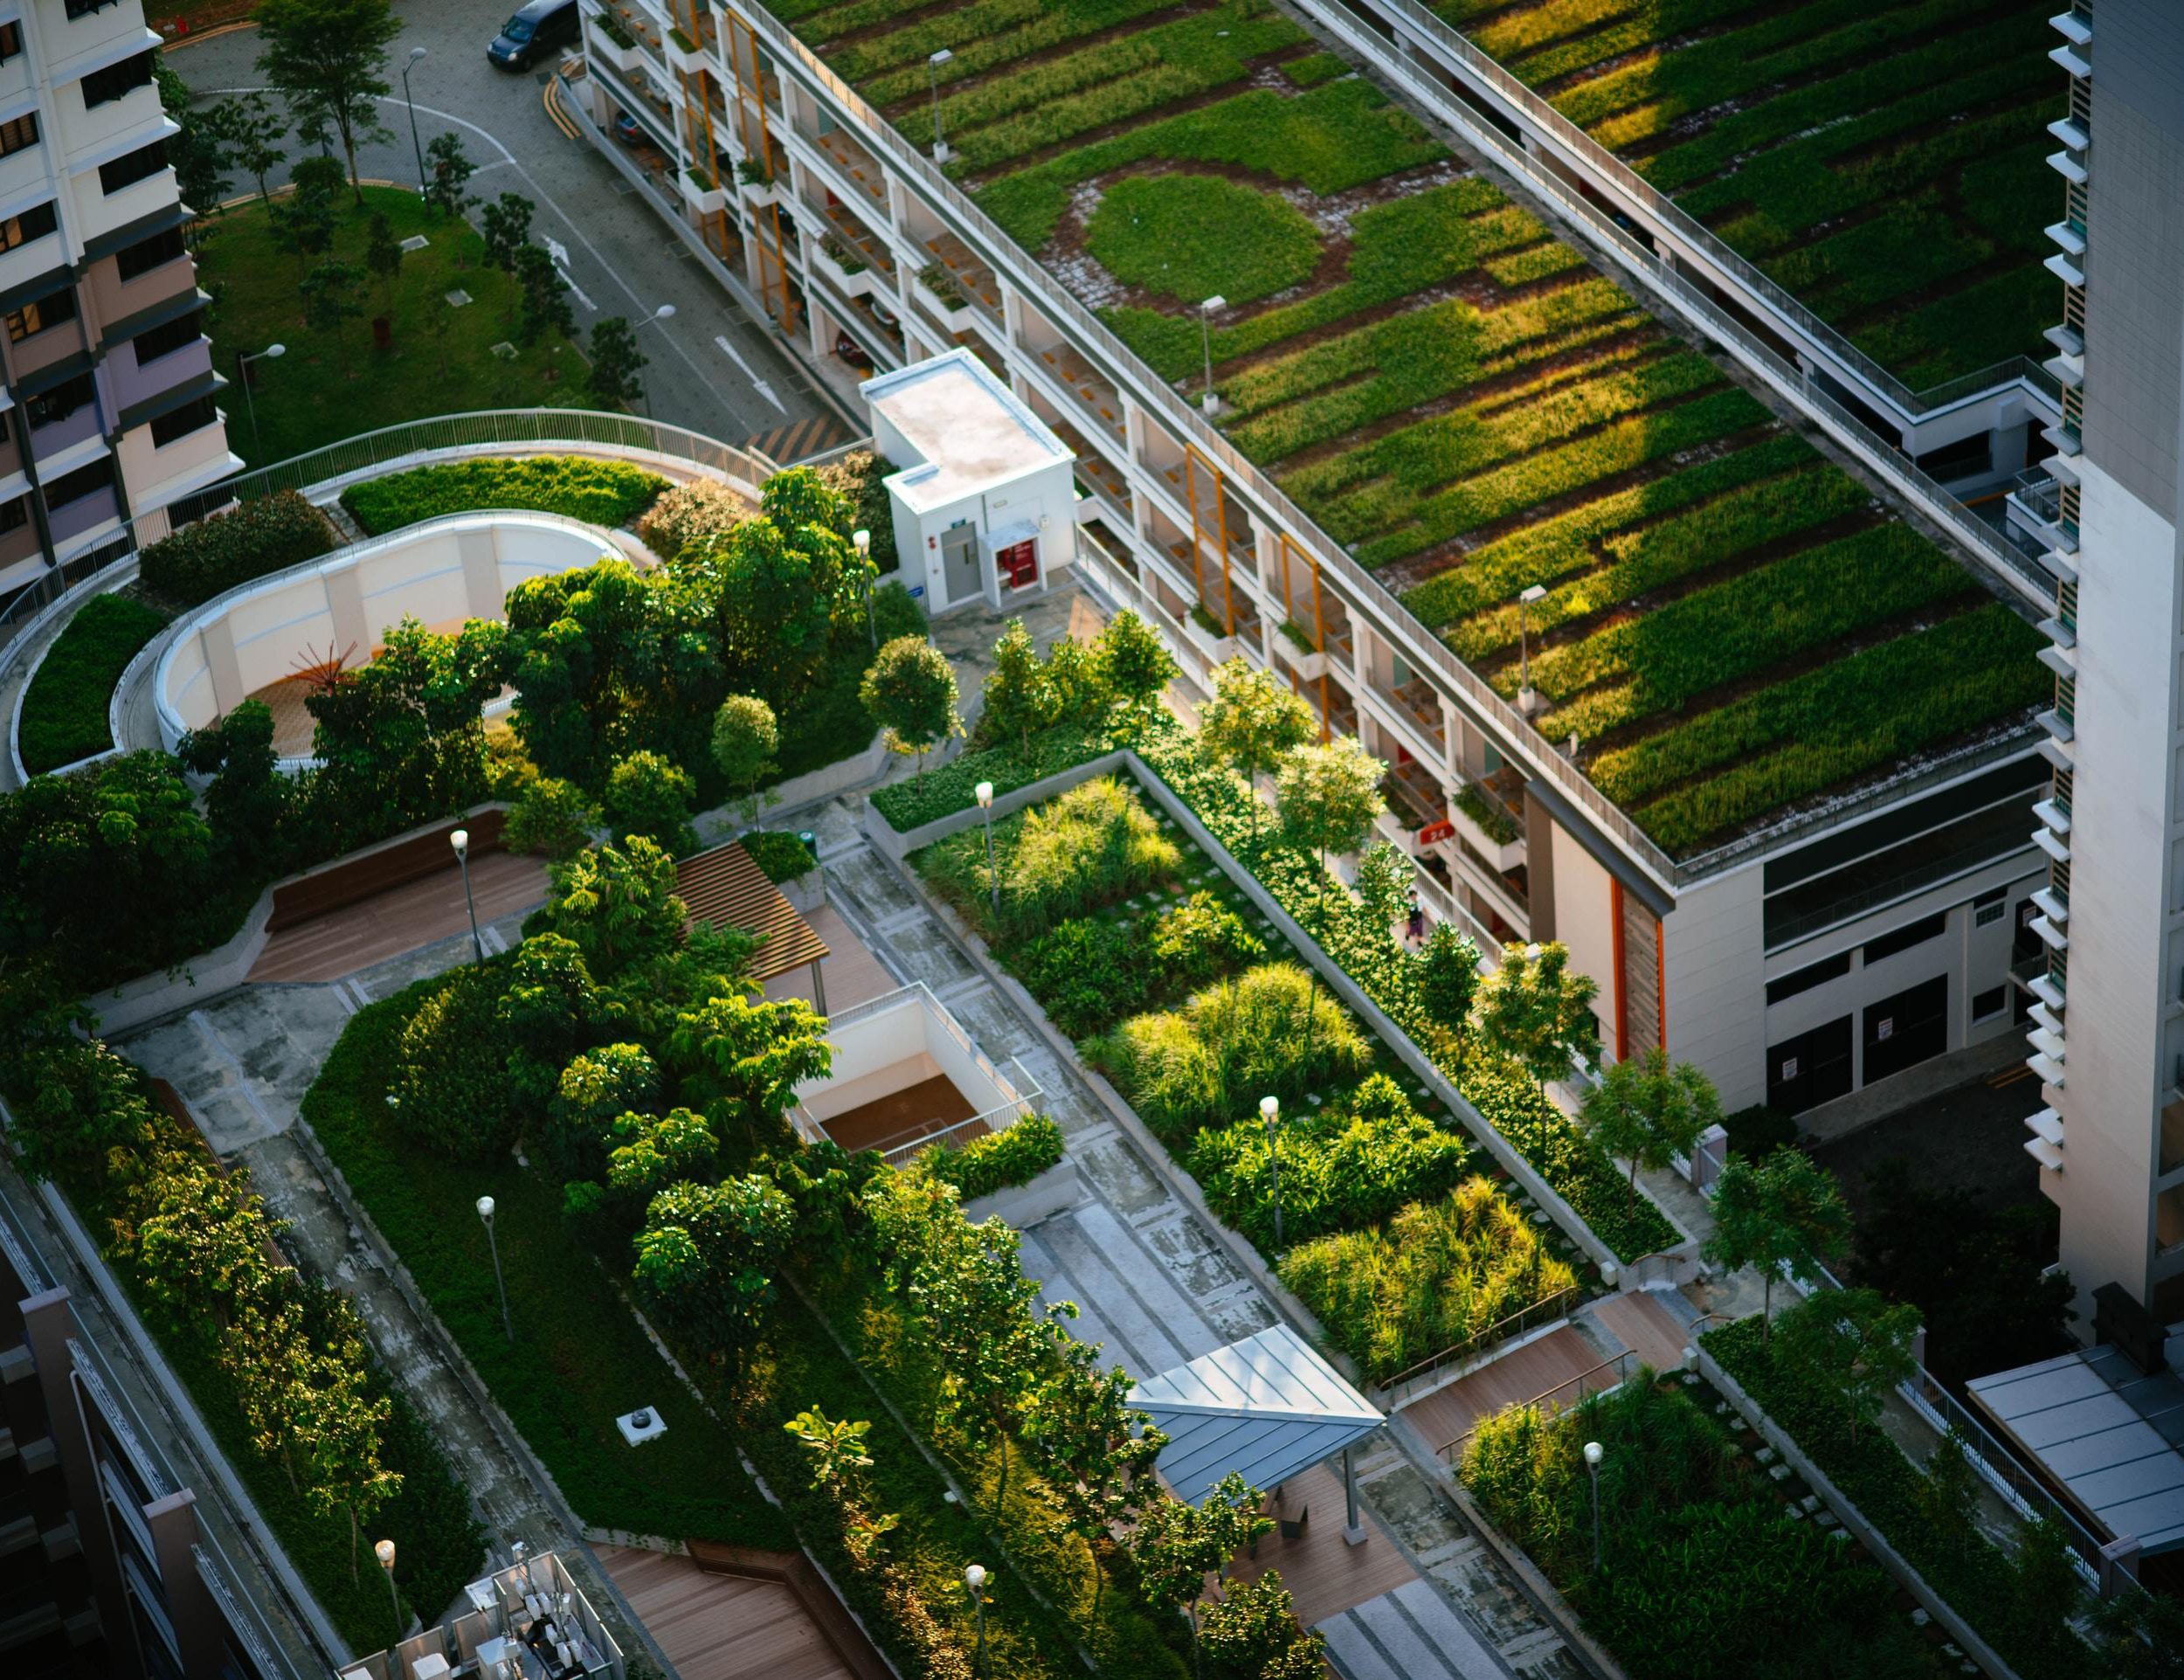 Photograph from above of buildings with living green roofs.